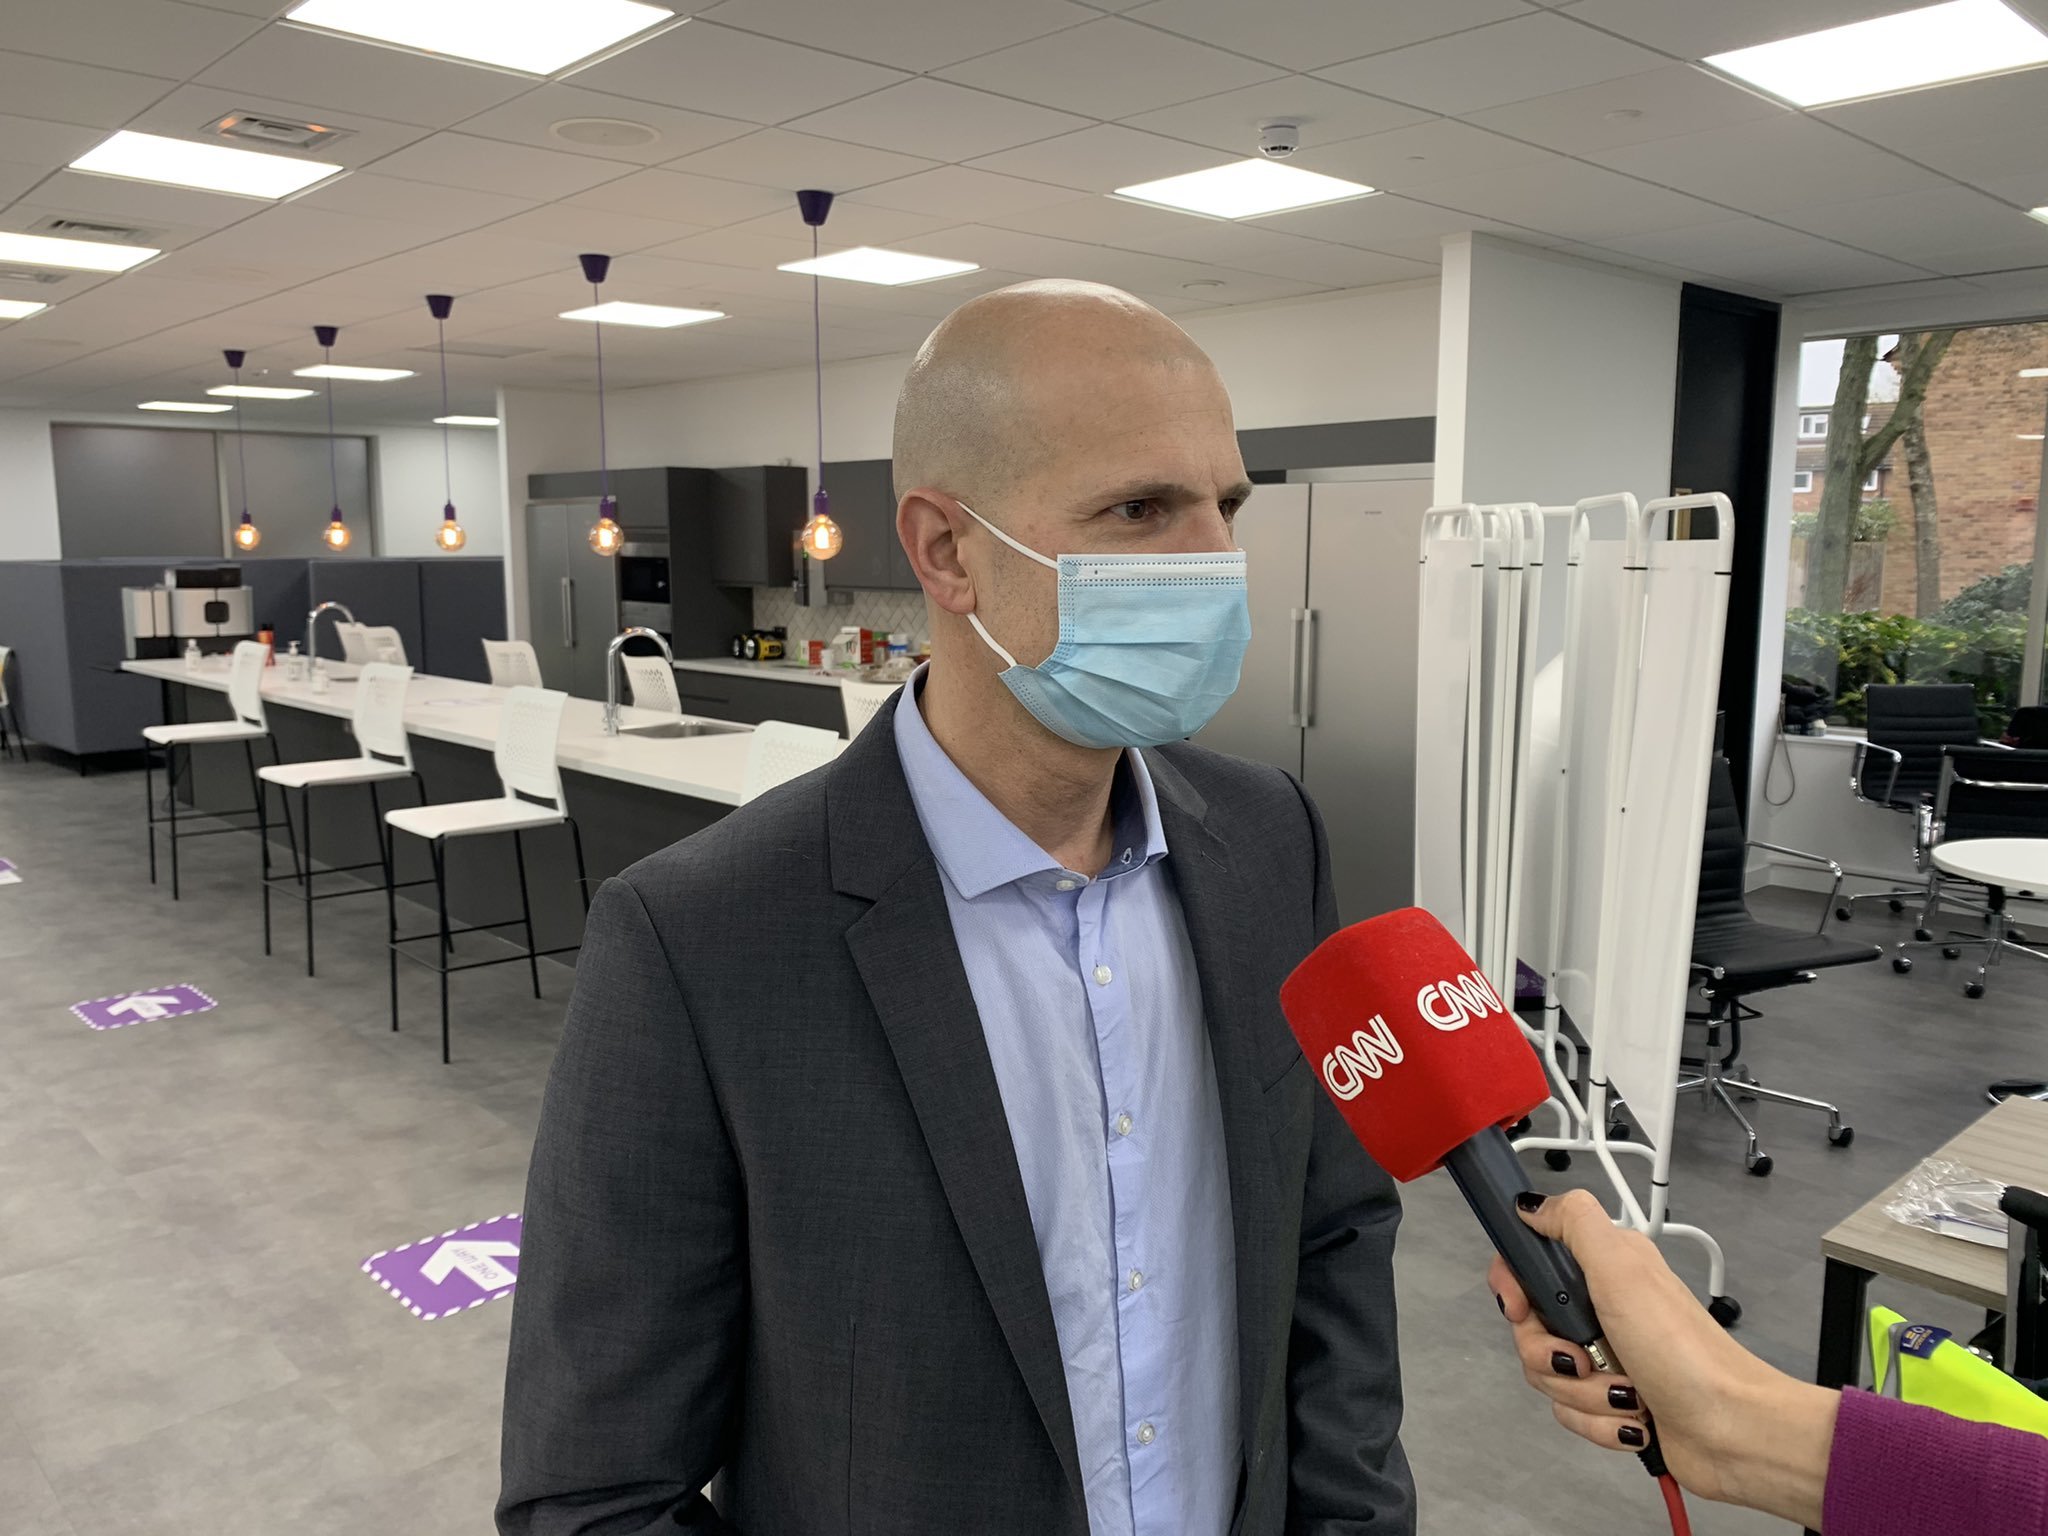 Oliver Picard, who runs the vaccination centre, speaking to CNN 